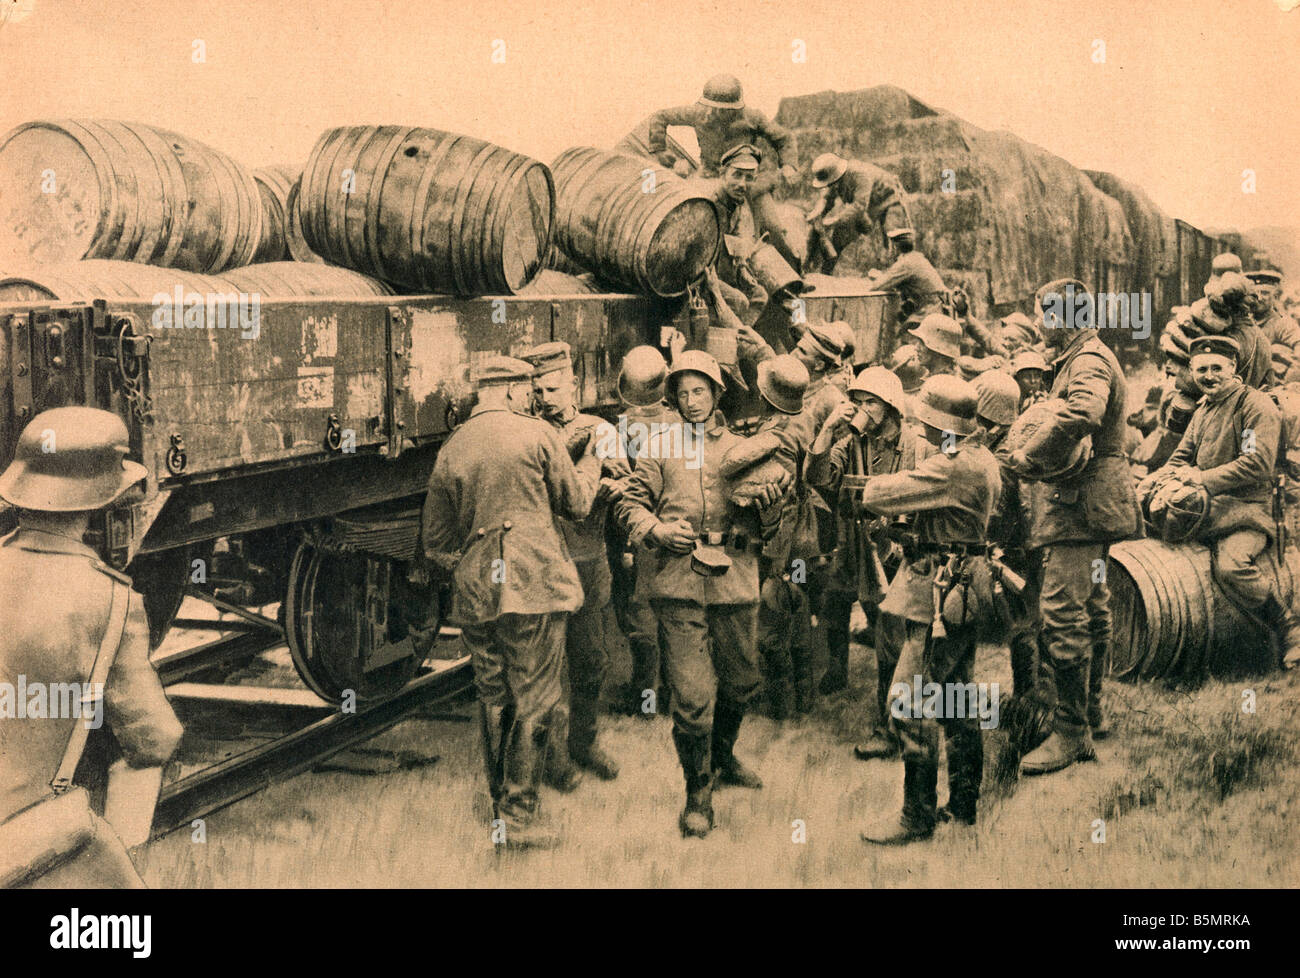 9 1918 3 0 A1 14 E WW1 West Fr captured supply train World War 1 Western Front German major offensive March July 1918 The battle Stock Photo